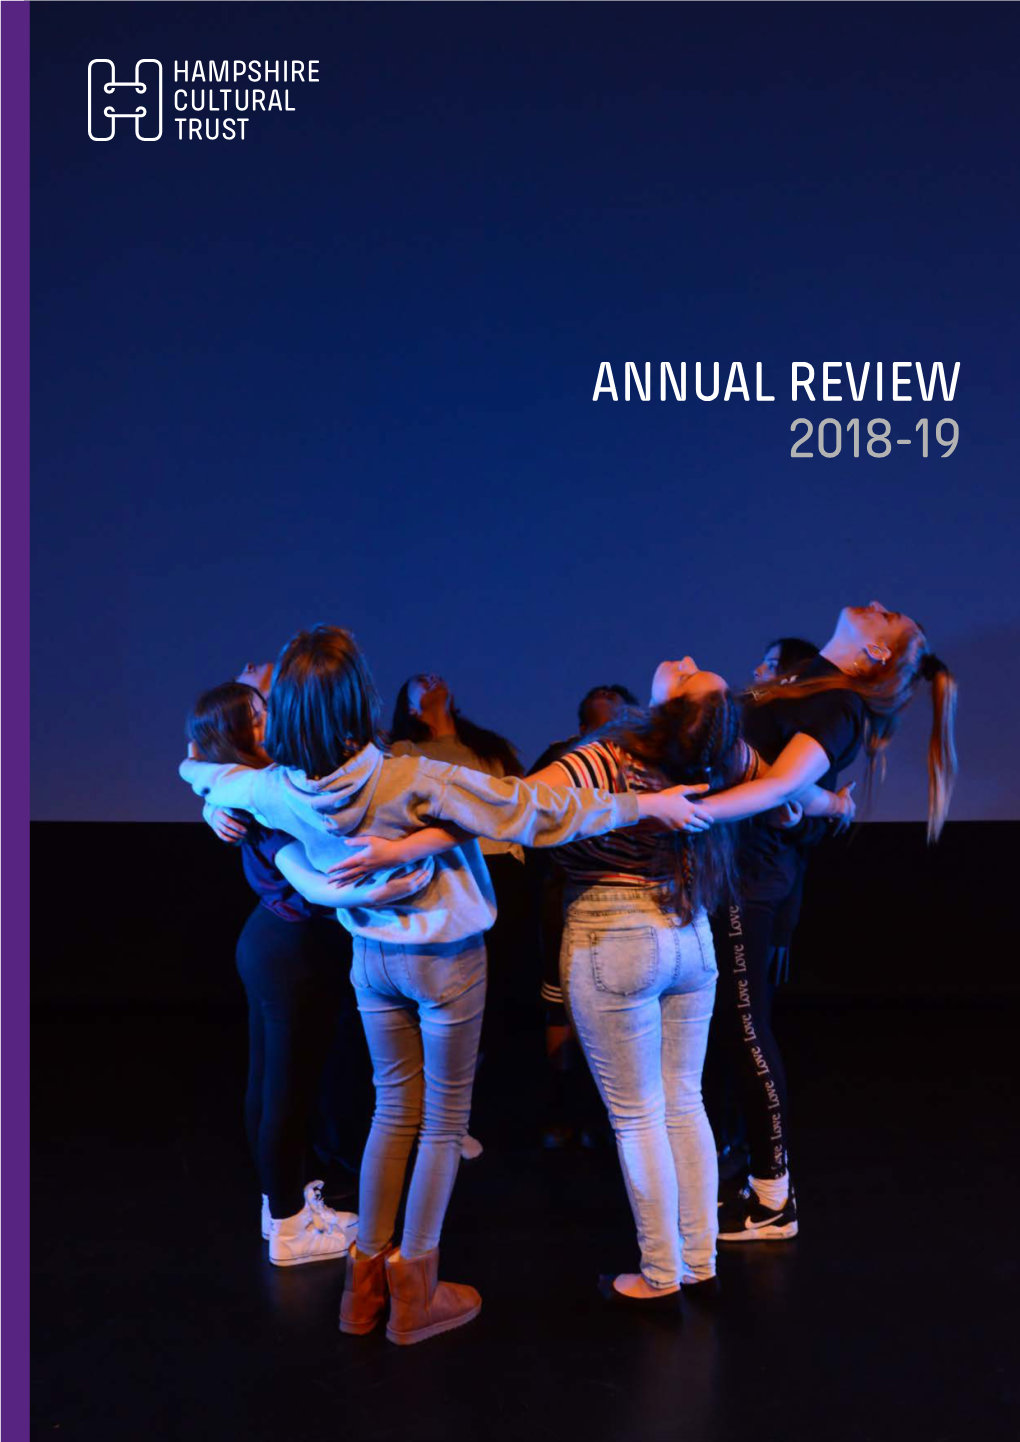 Annual Review 2018-19